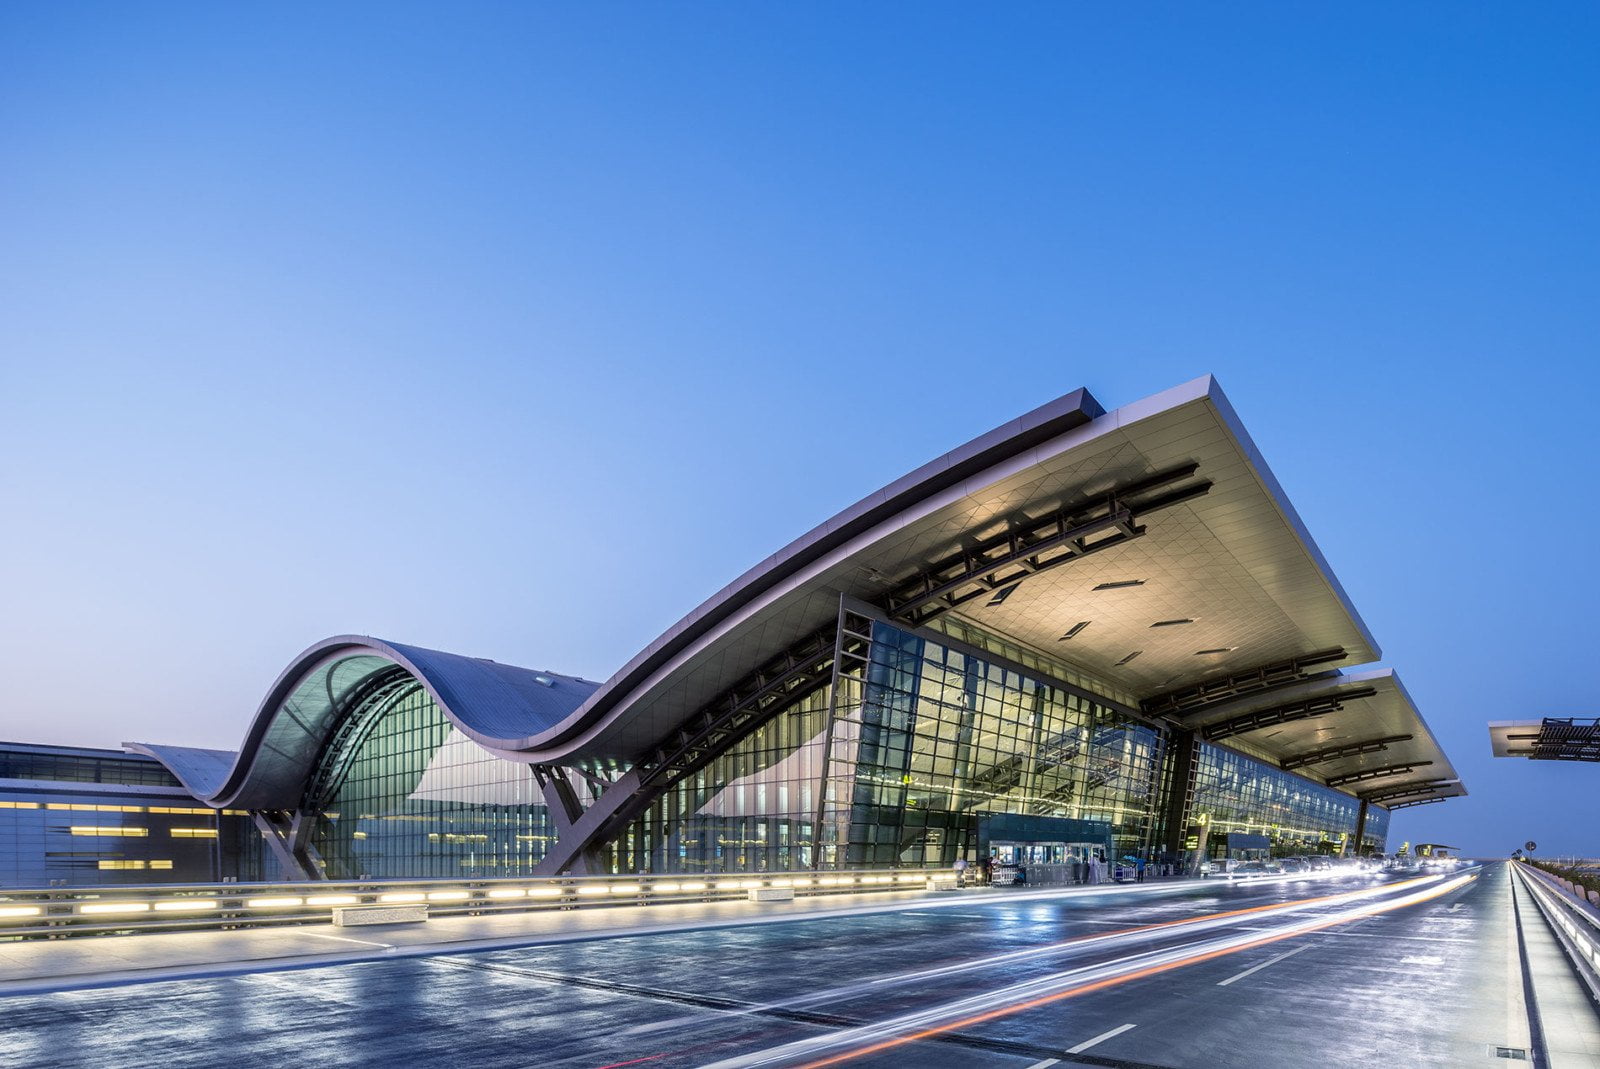 Hamad is the most beautiful airport in the world